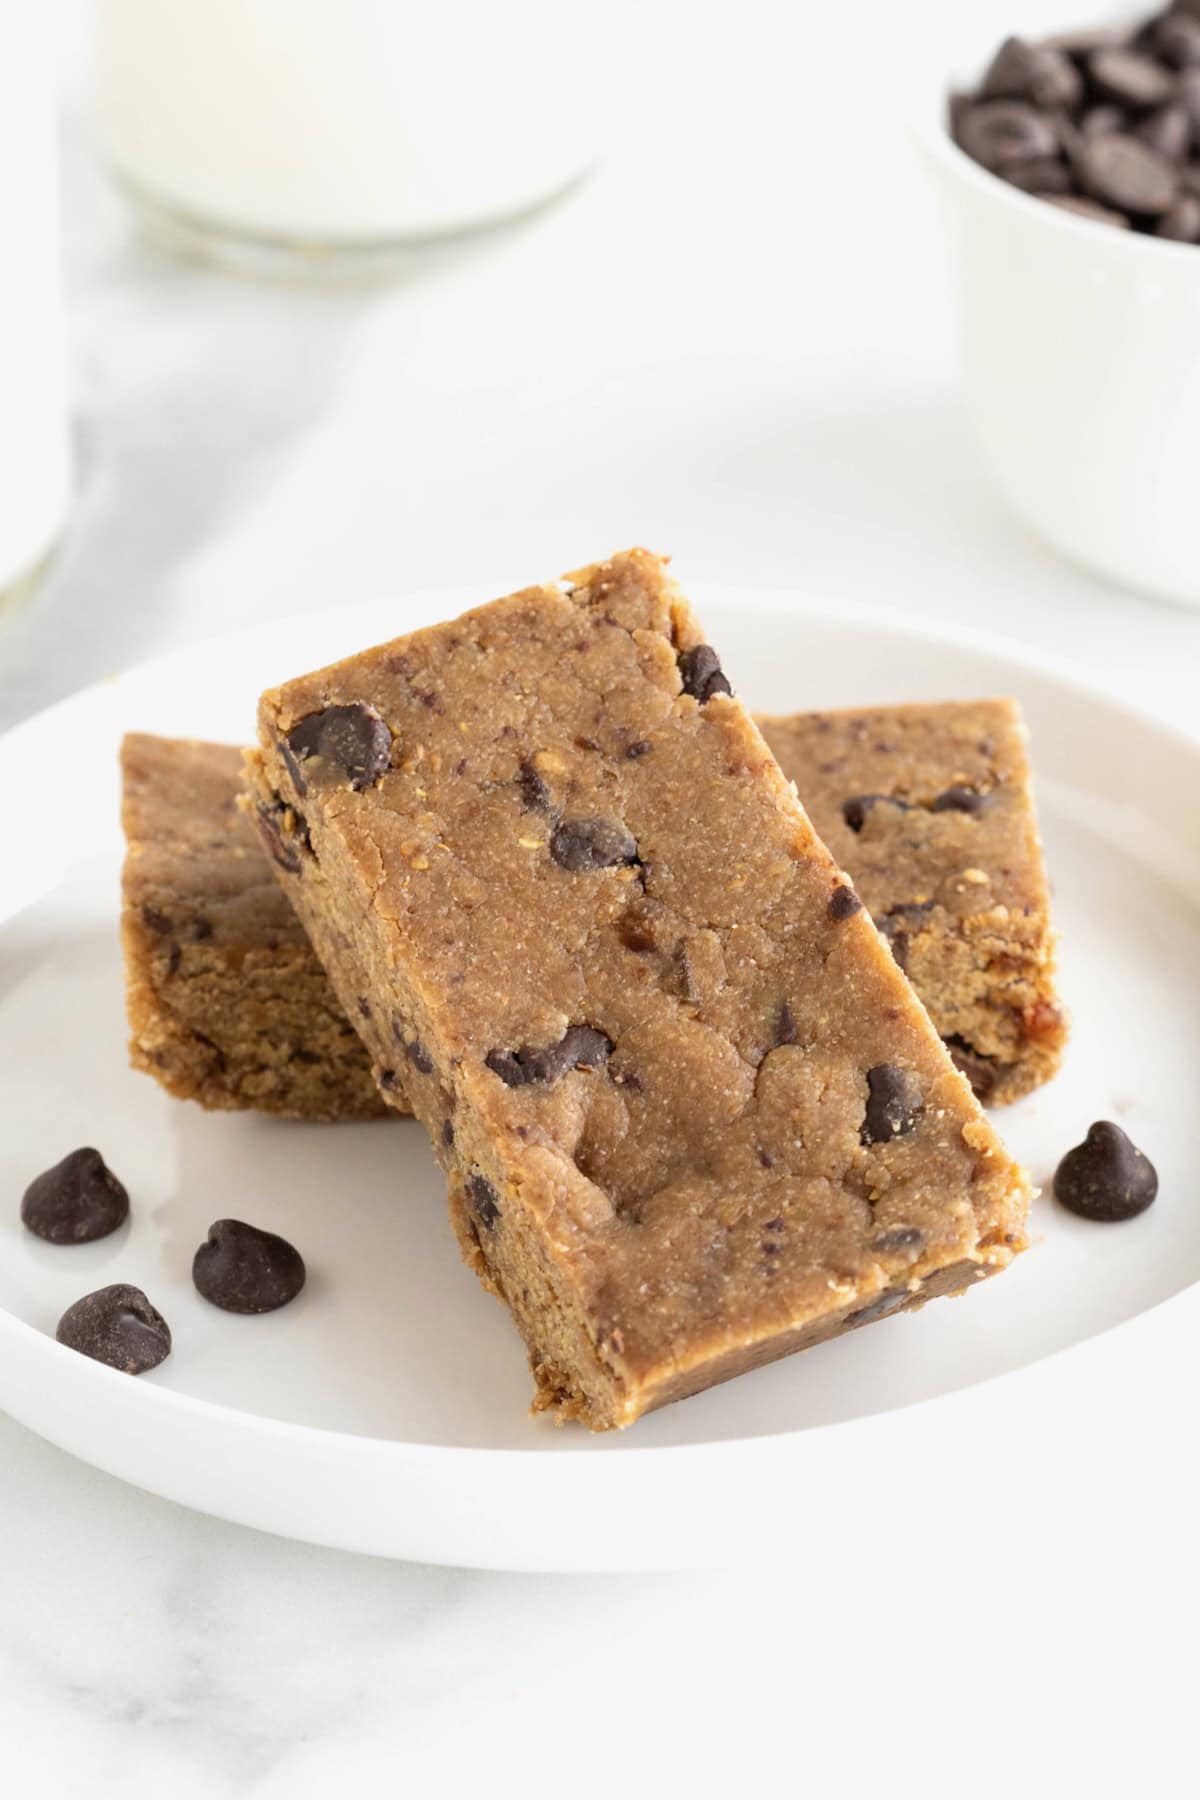 Two peanut butter chocolate chip breakfast bars on a small white plate. A few chocolate chips are scattered on the plate.